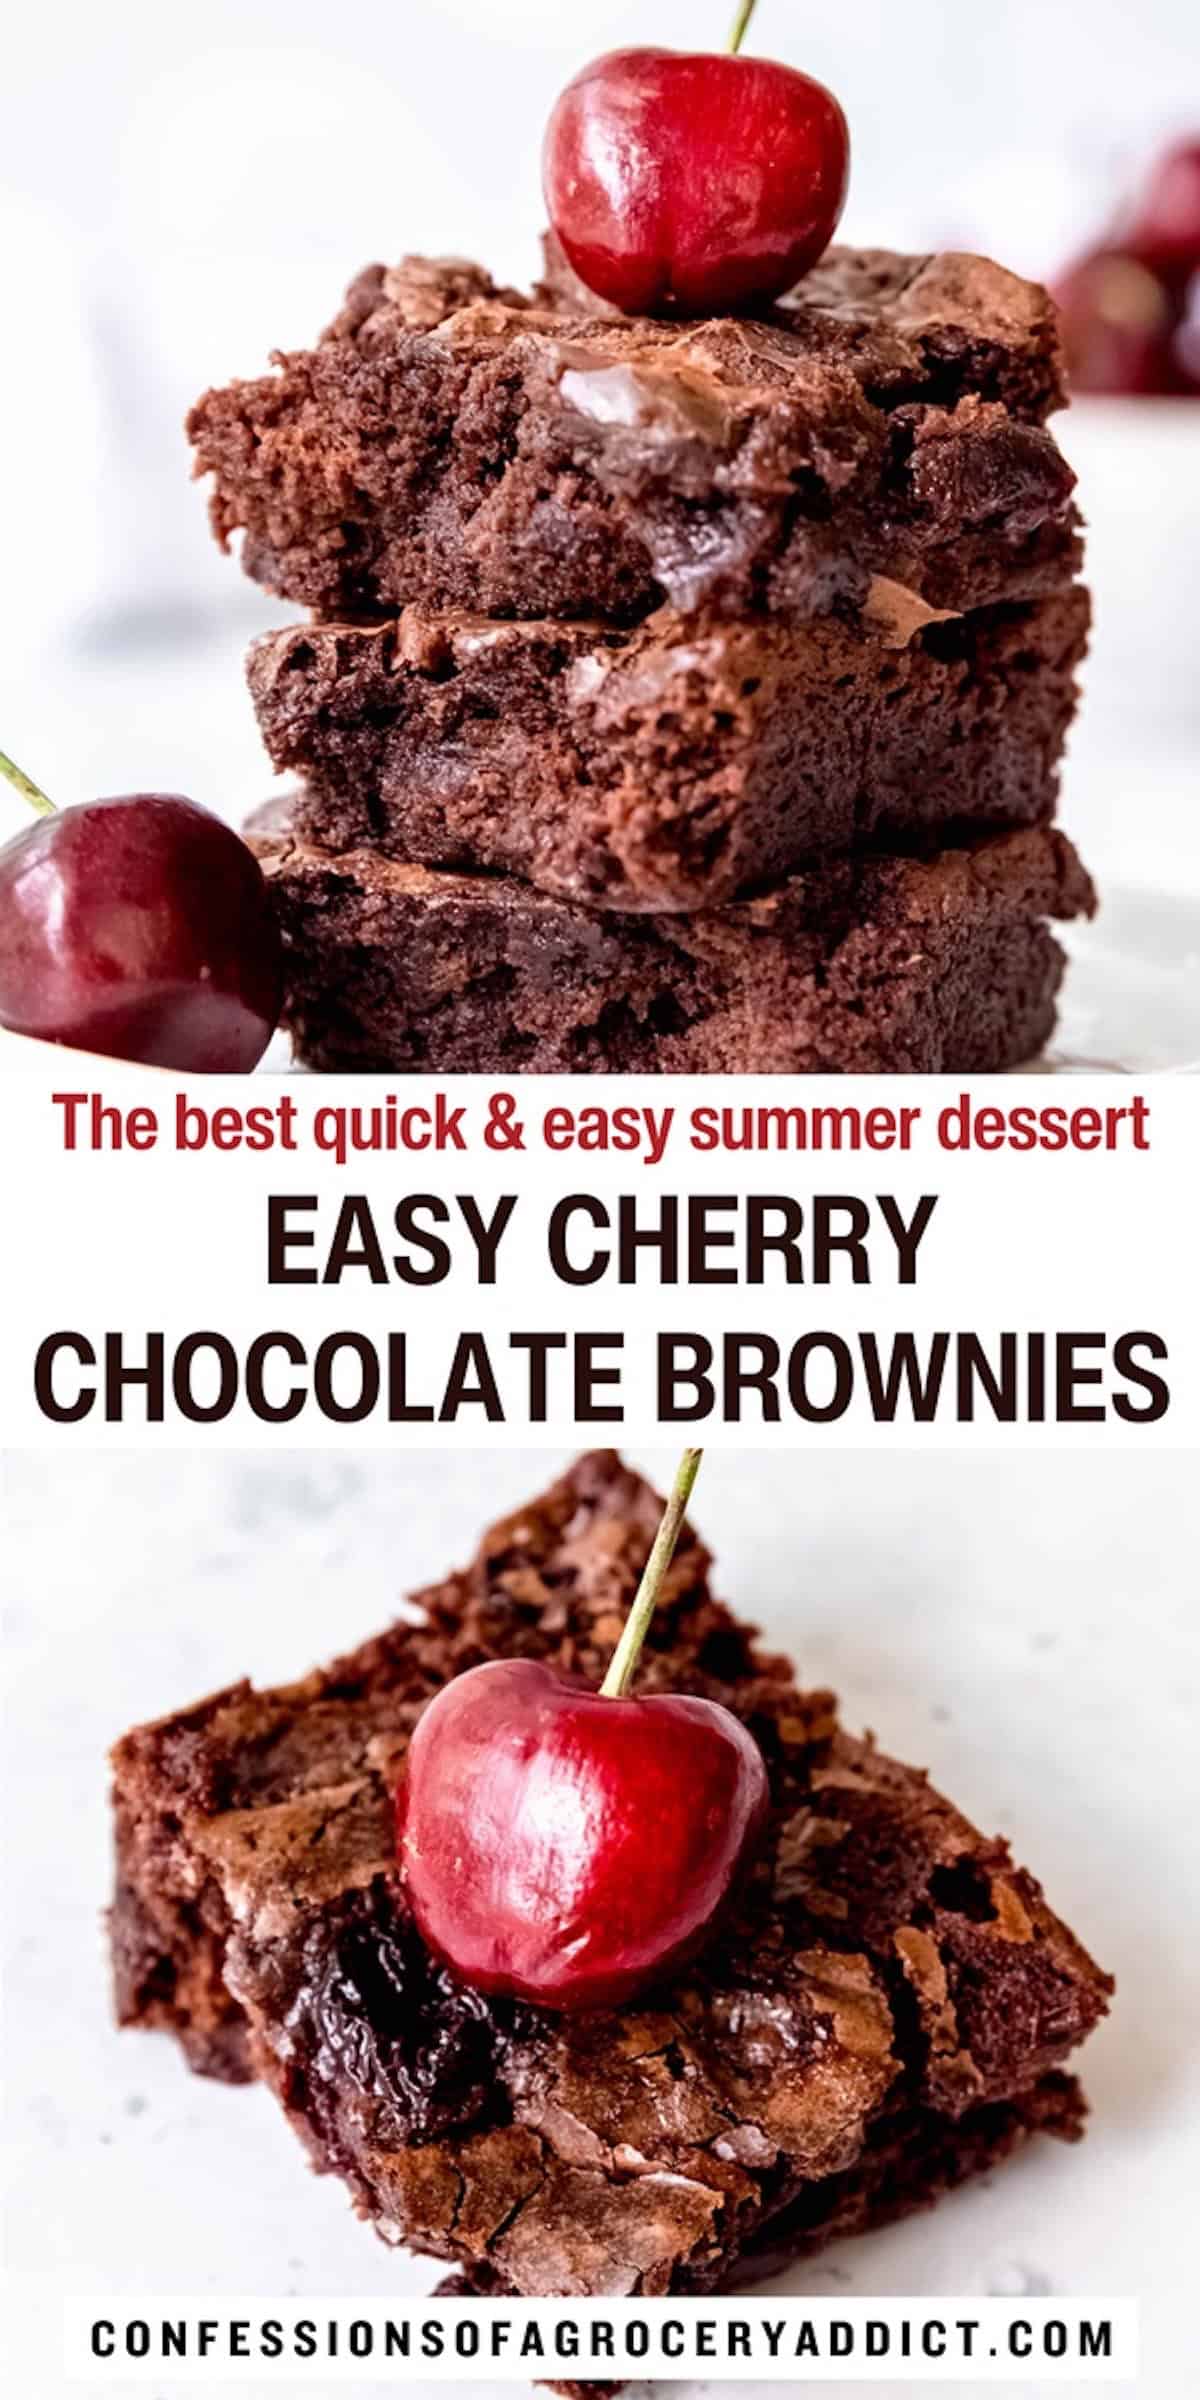 vertical pin with two images (a stack of 3 cherry chocolate brownies with a fresh cherry on top and a 45 degree angle shot of a single cherry chocolate brownie with a fresh cherry on top) with text overlay that reads "the best quick & easy summer dessert Easy cherry chocolate brownies."